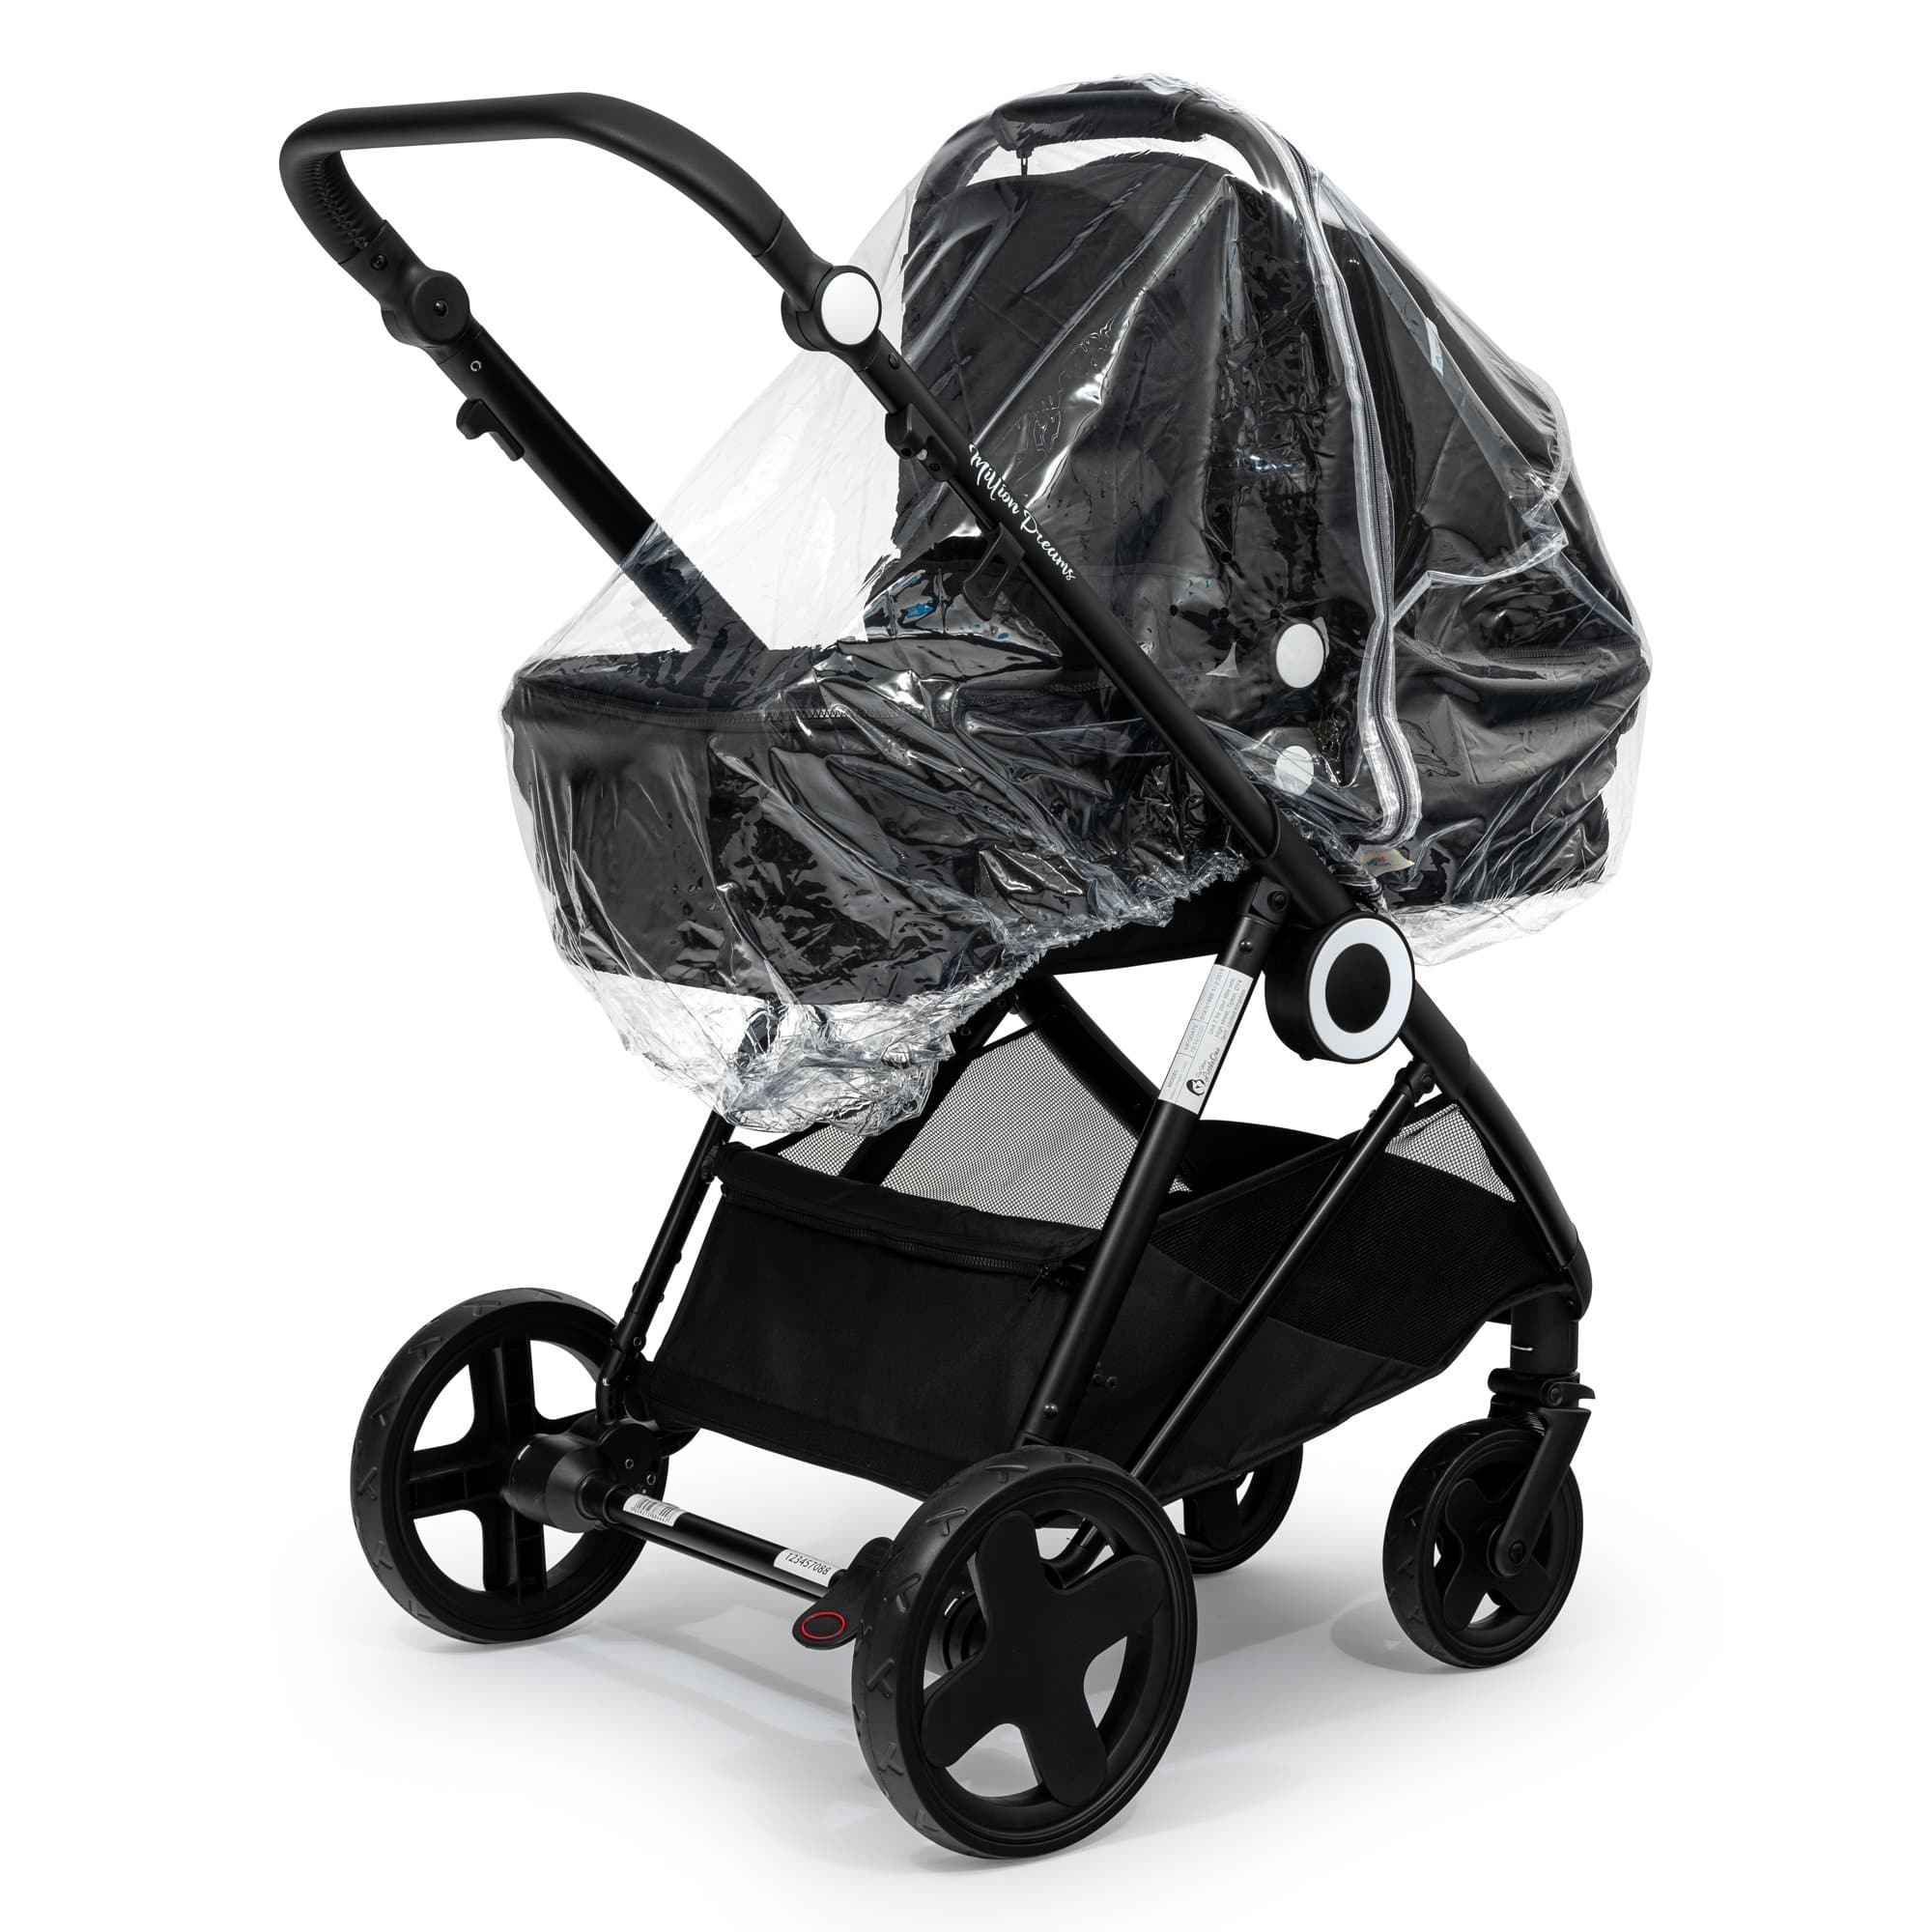 2 in 1 Rain Cover Compatible with Bebe 9 - Fits All Models - For Your Little One